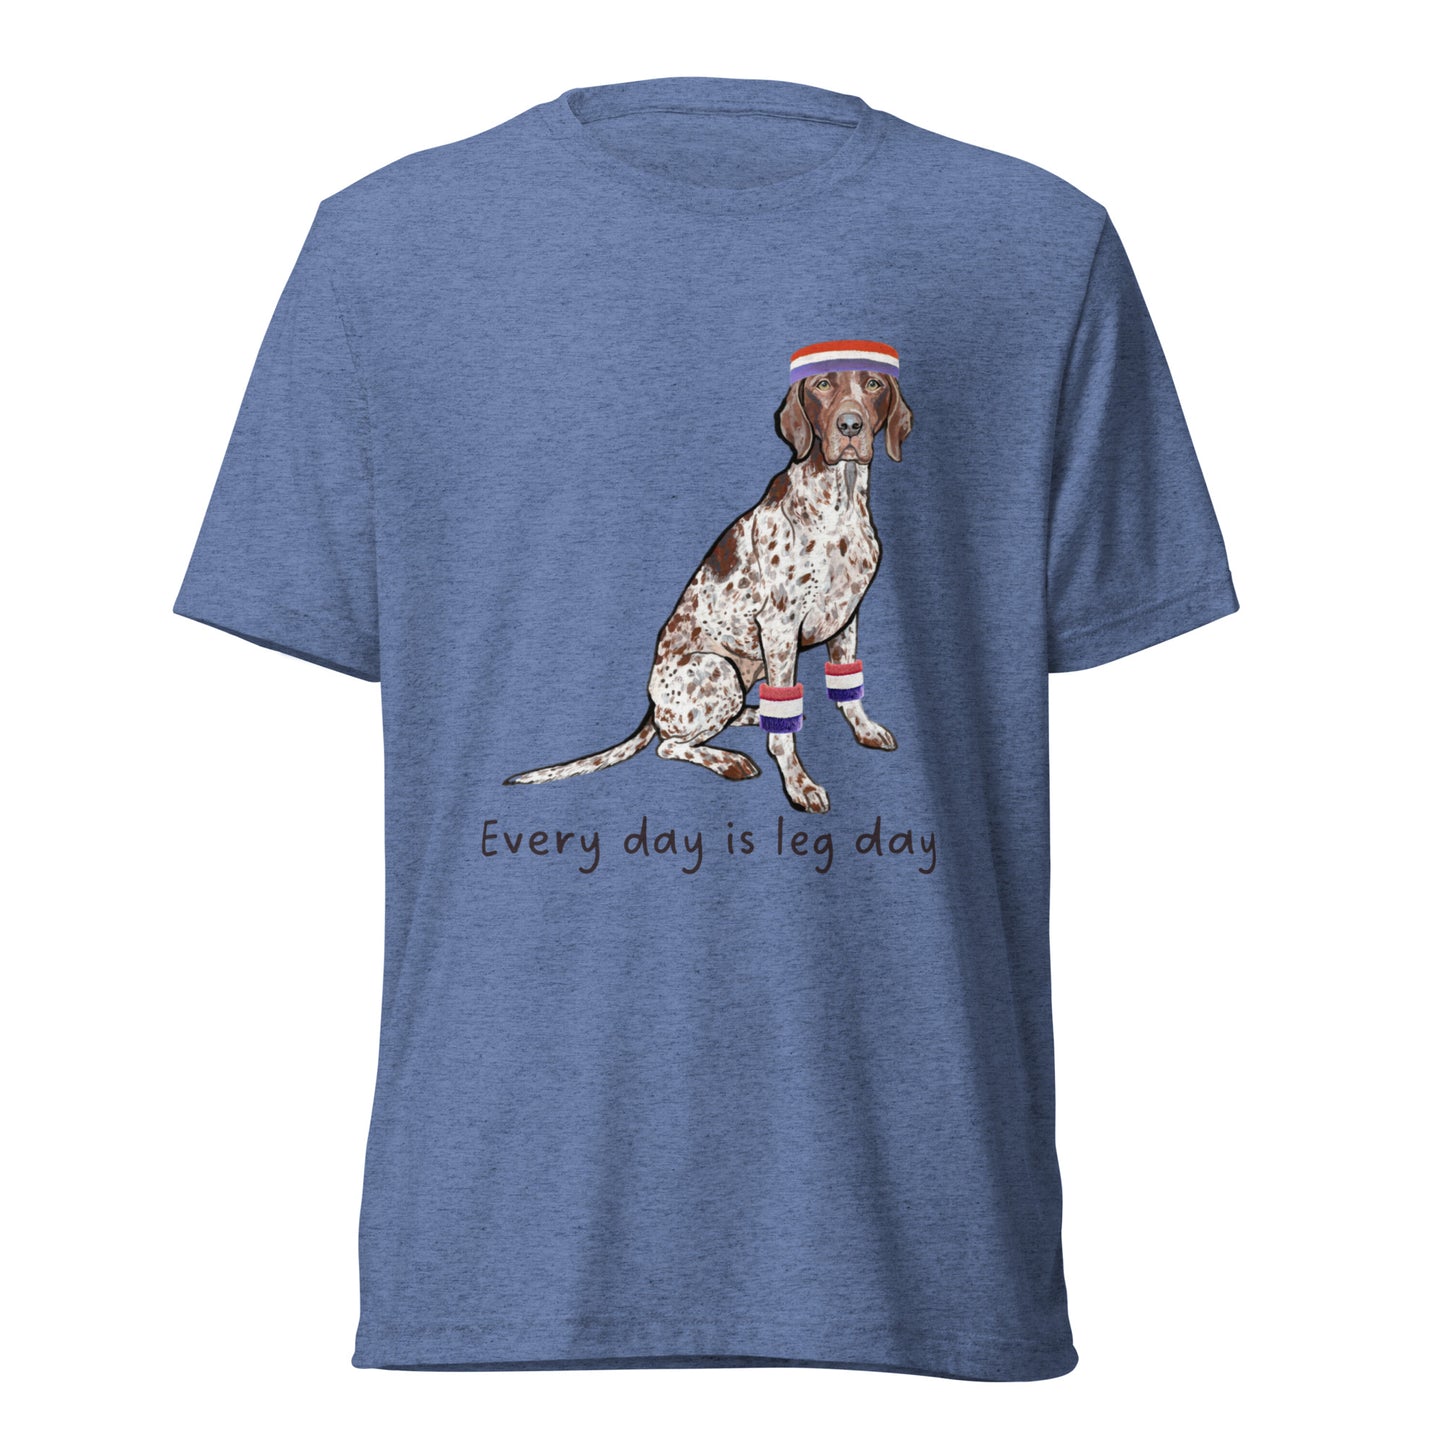 Every day is leg day Short sleeve t-shirt